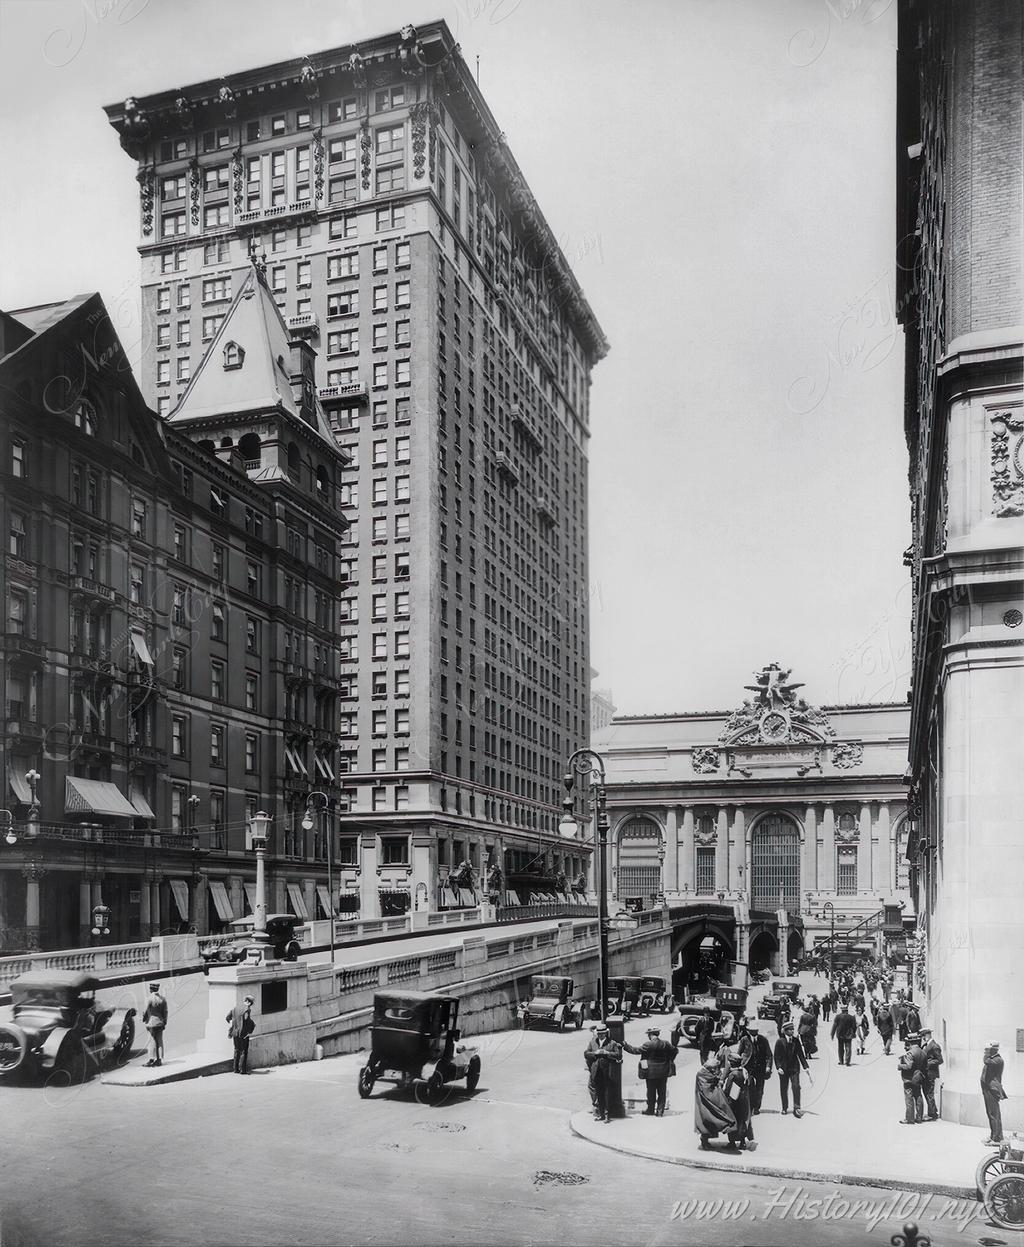 Photograph of Grand Central Station with the Park Avenue Bridge in foreground and the Station's facade in background.